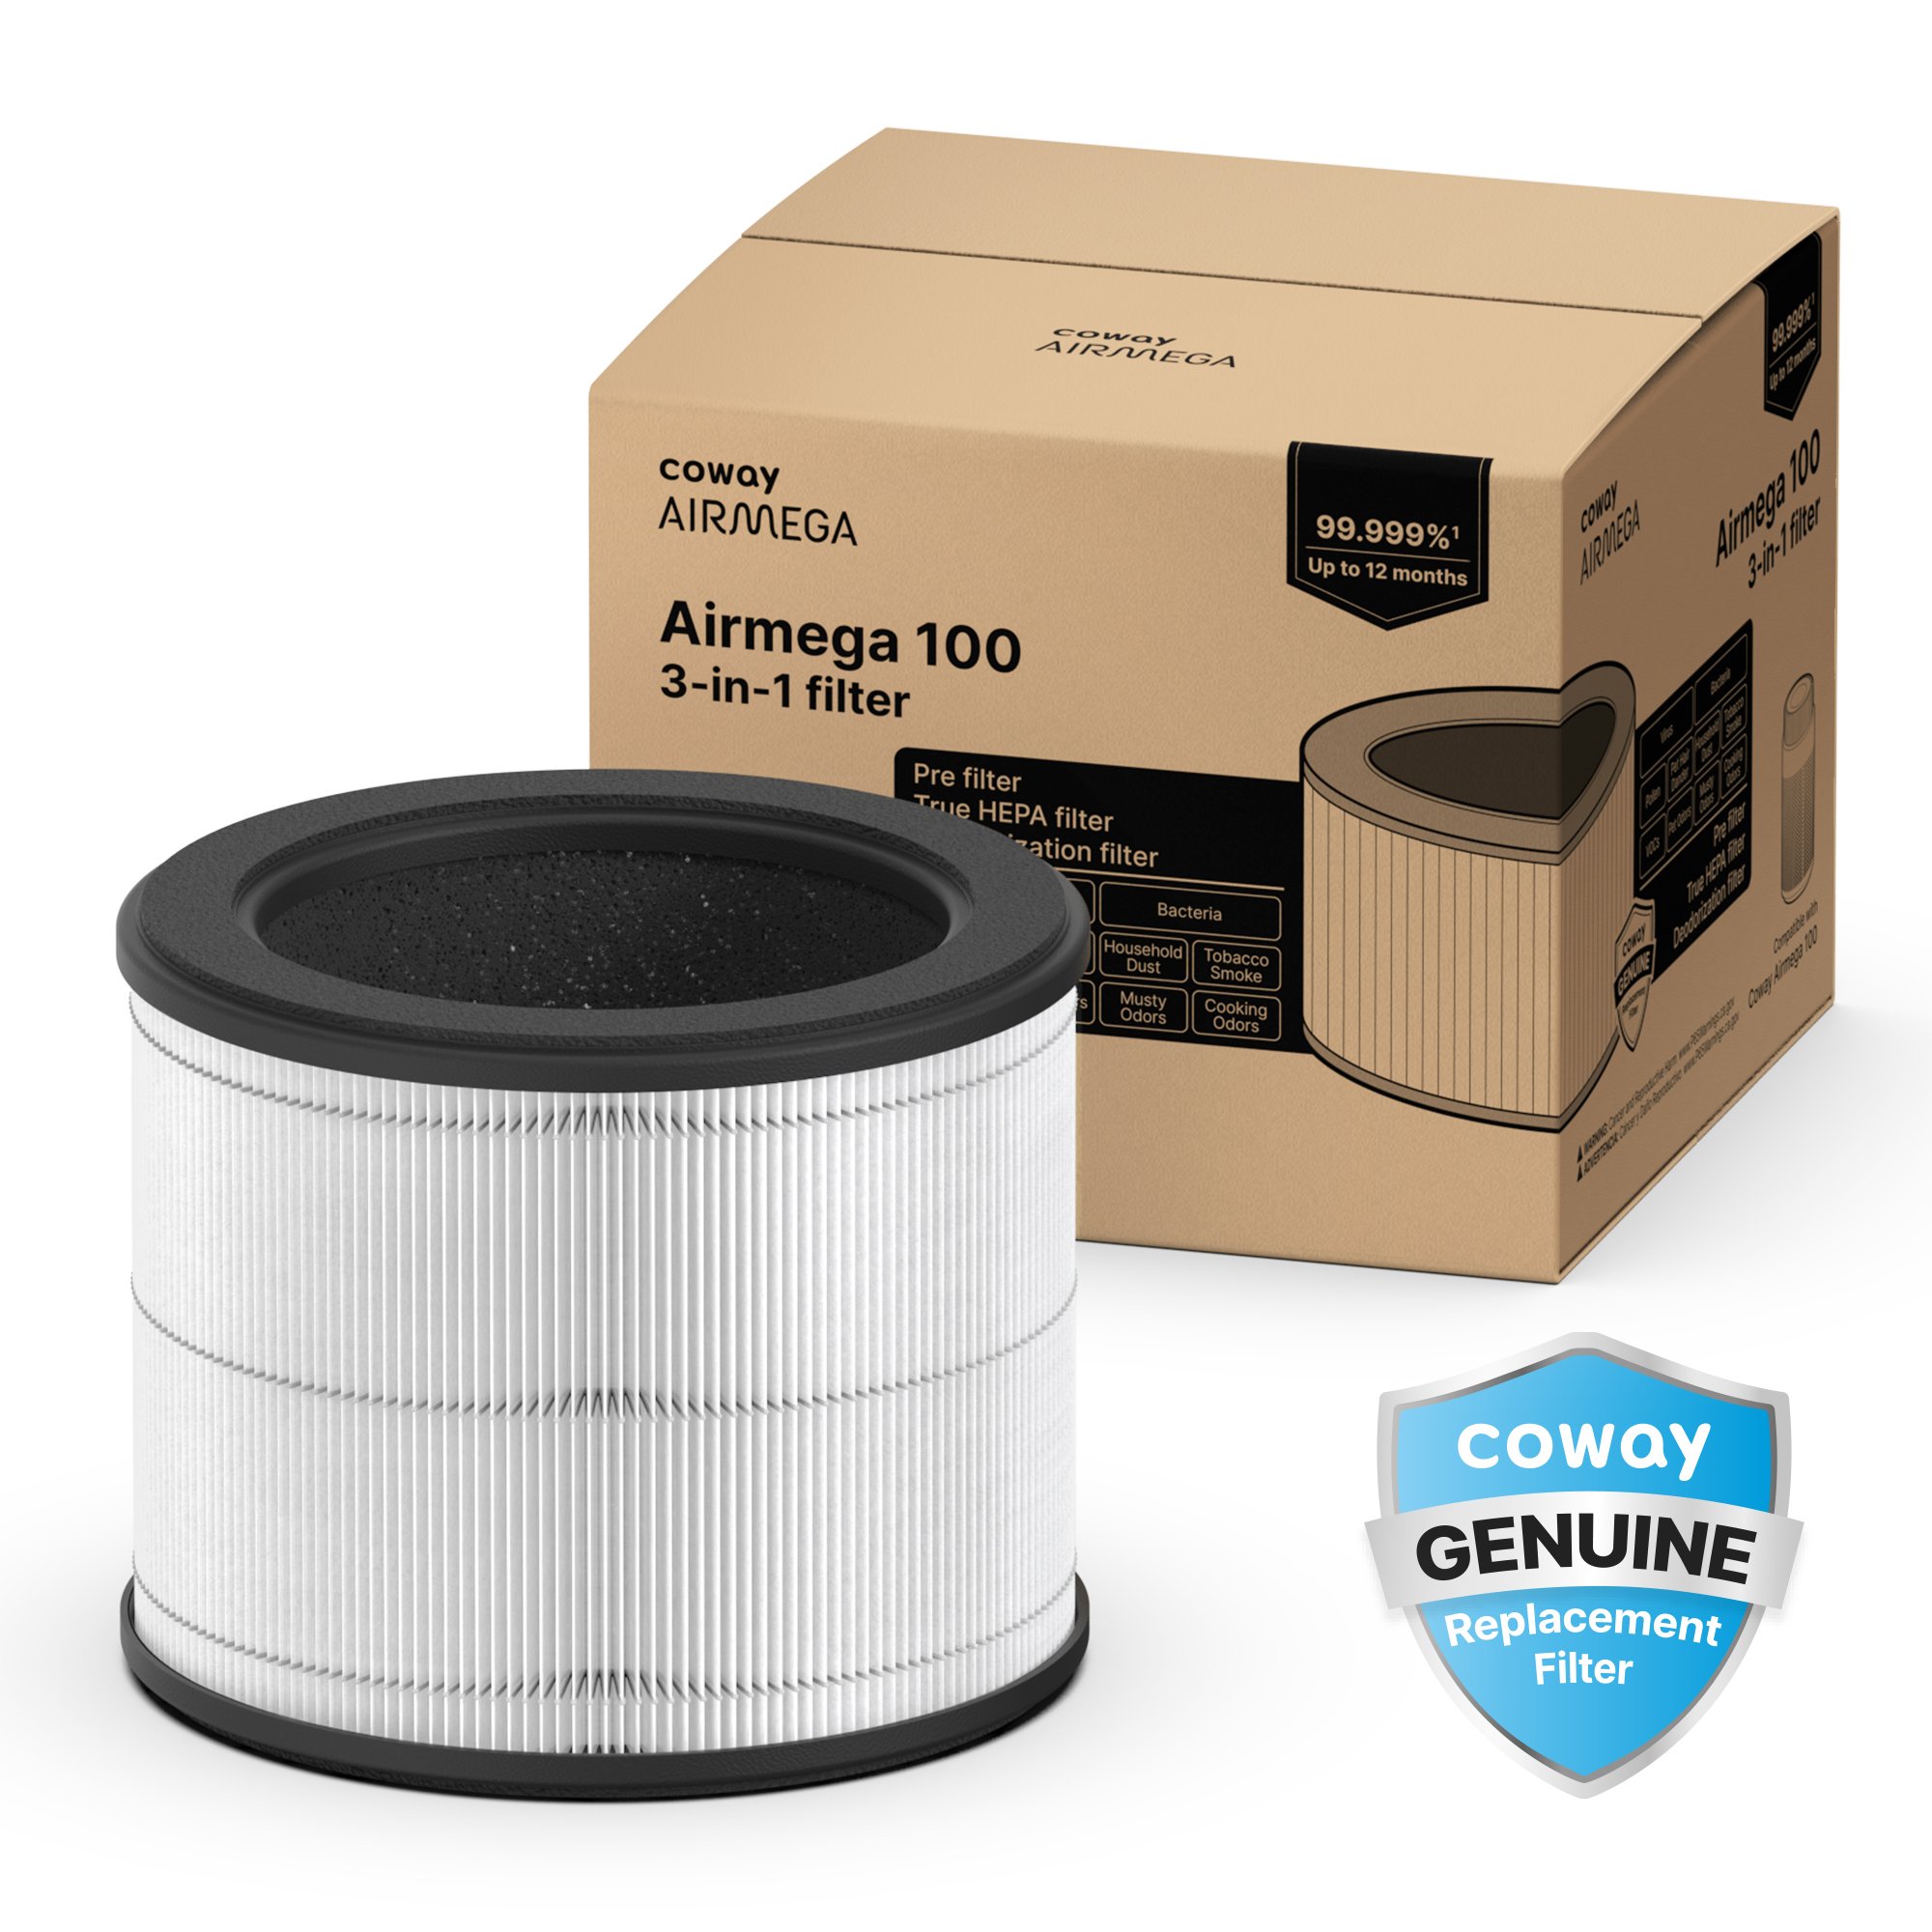 Airmega 100 Filter with Box